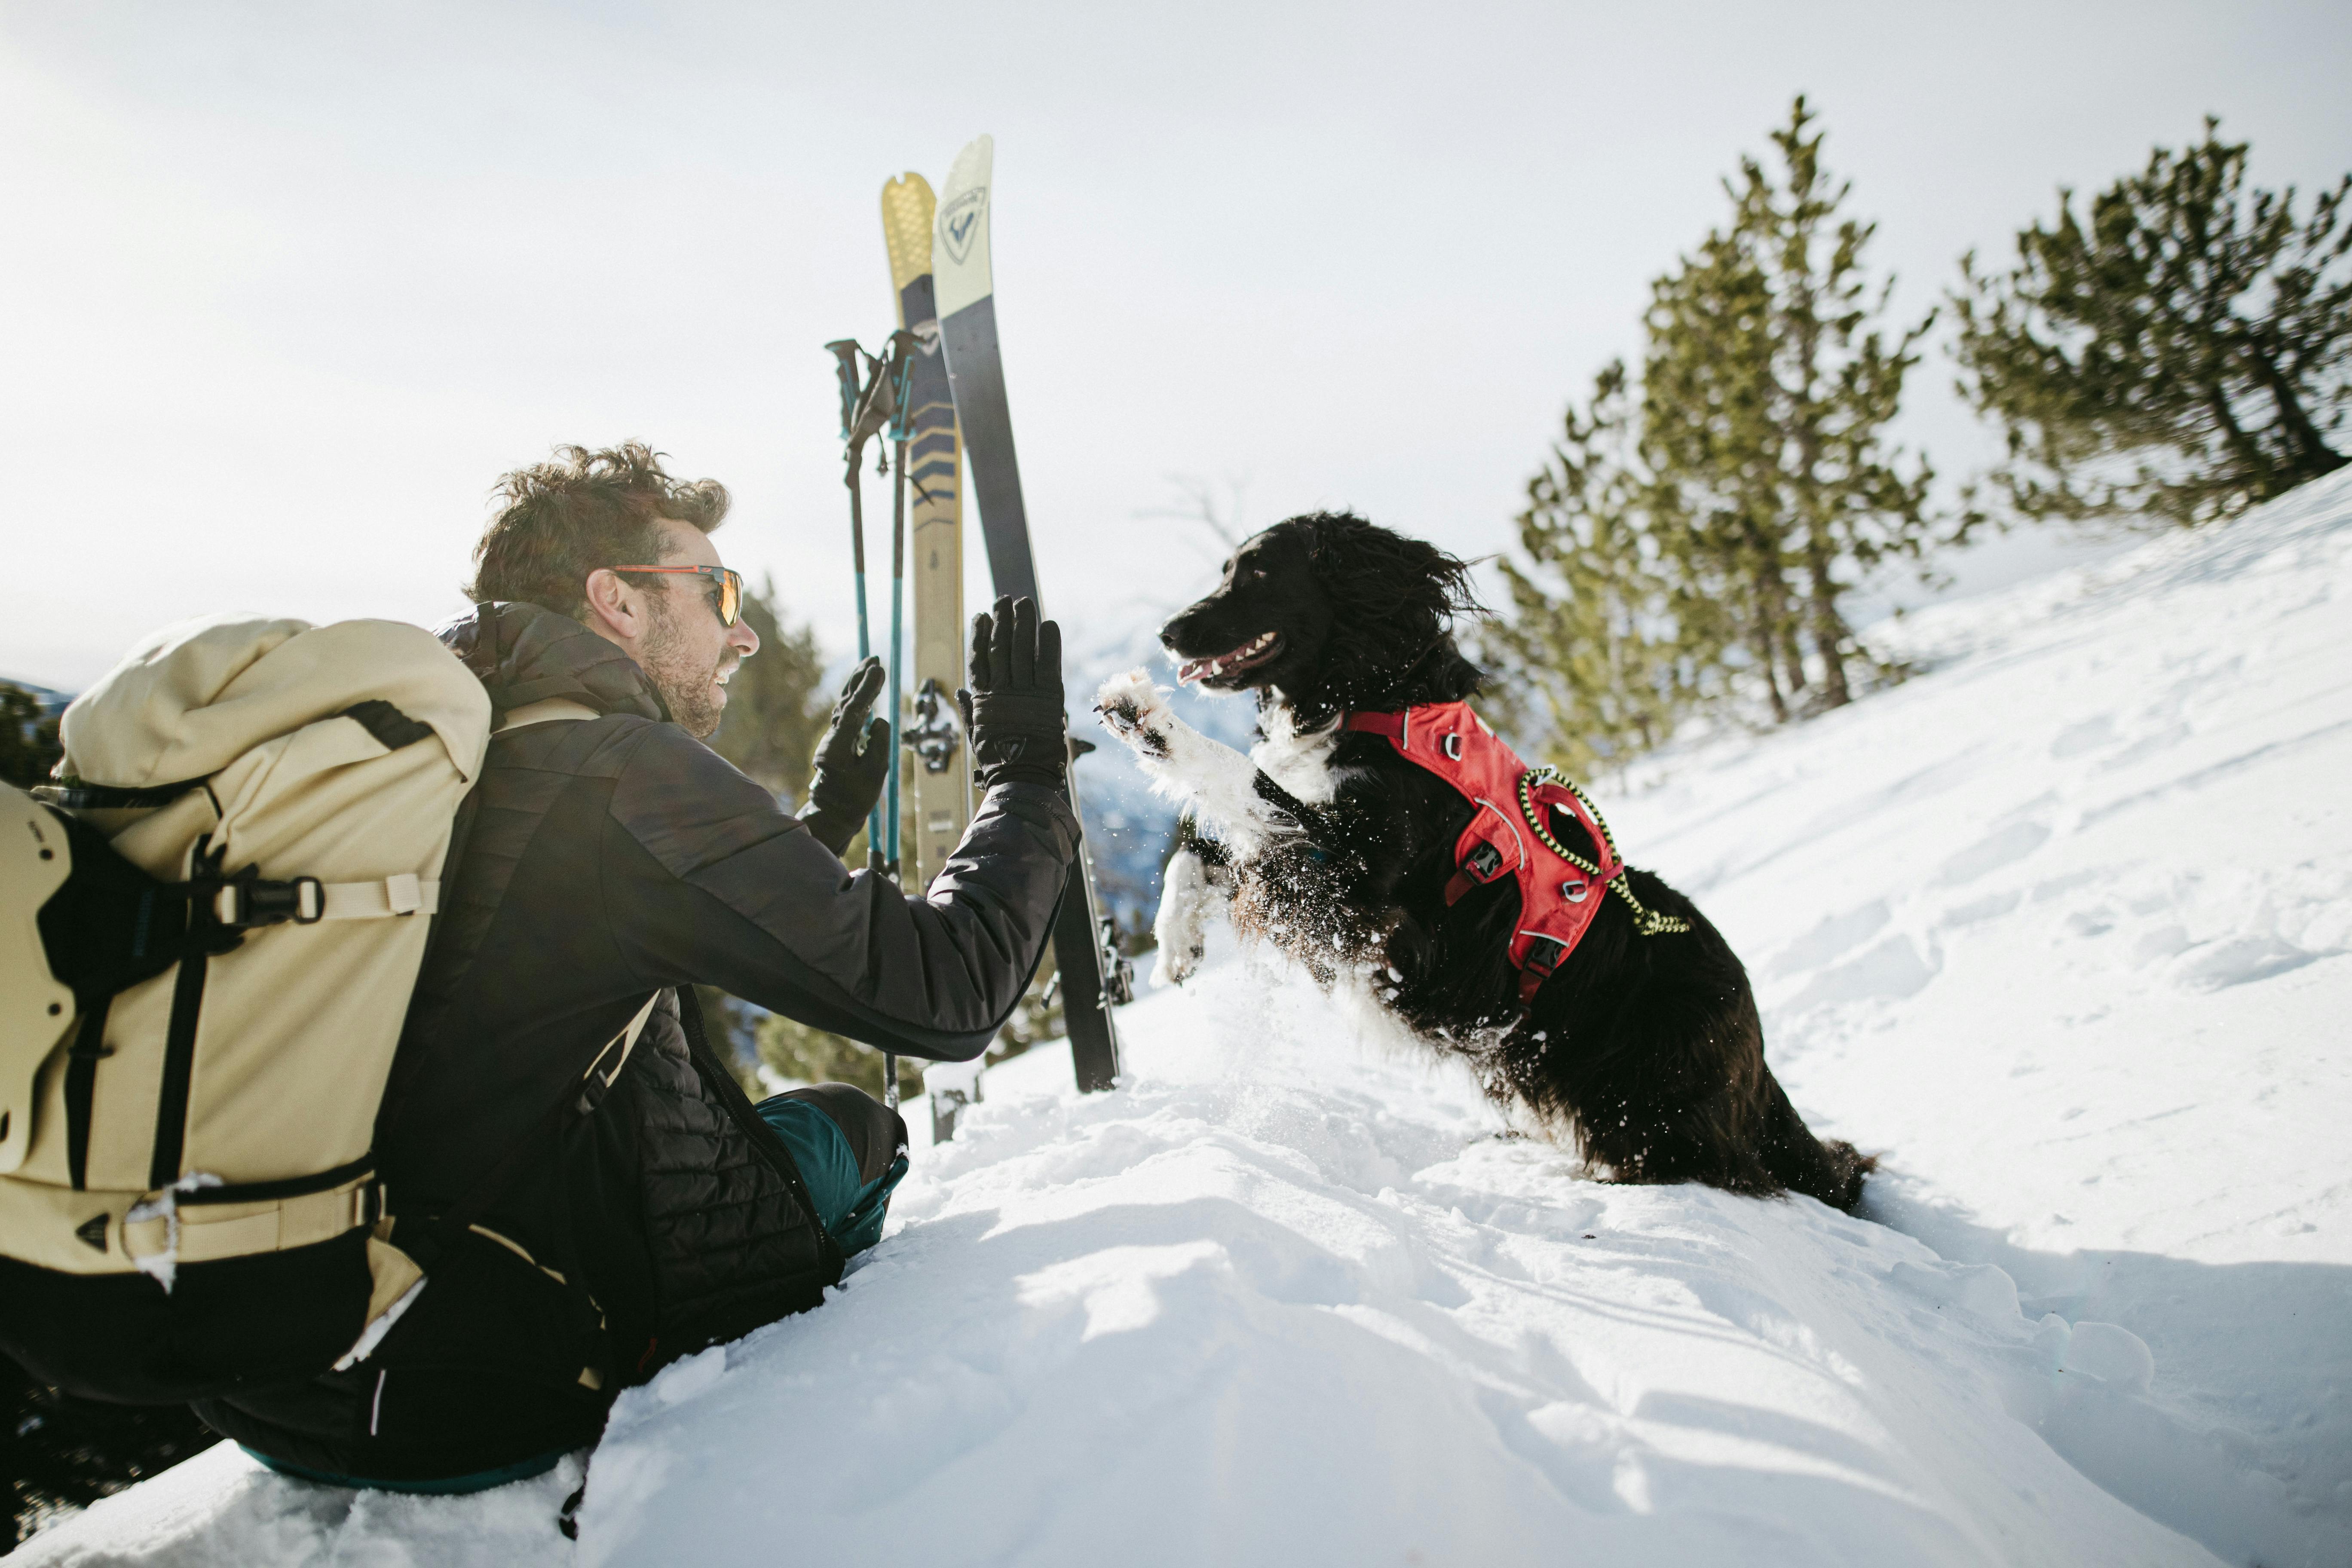 A man sits in the snow next to his skis while wearing a ski backpack. He smiles at a dog that is running to him.